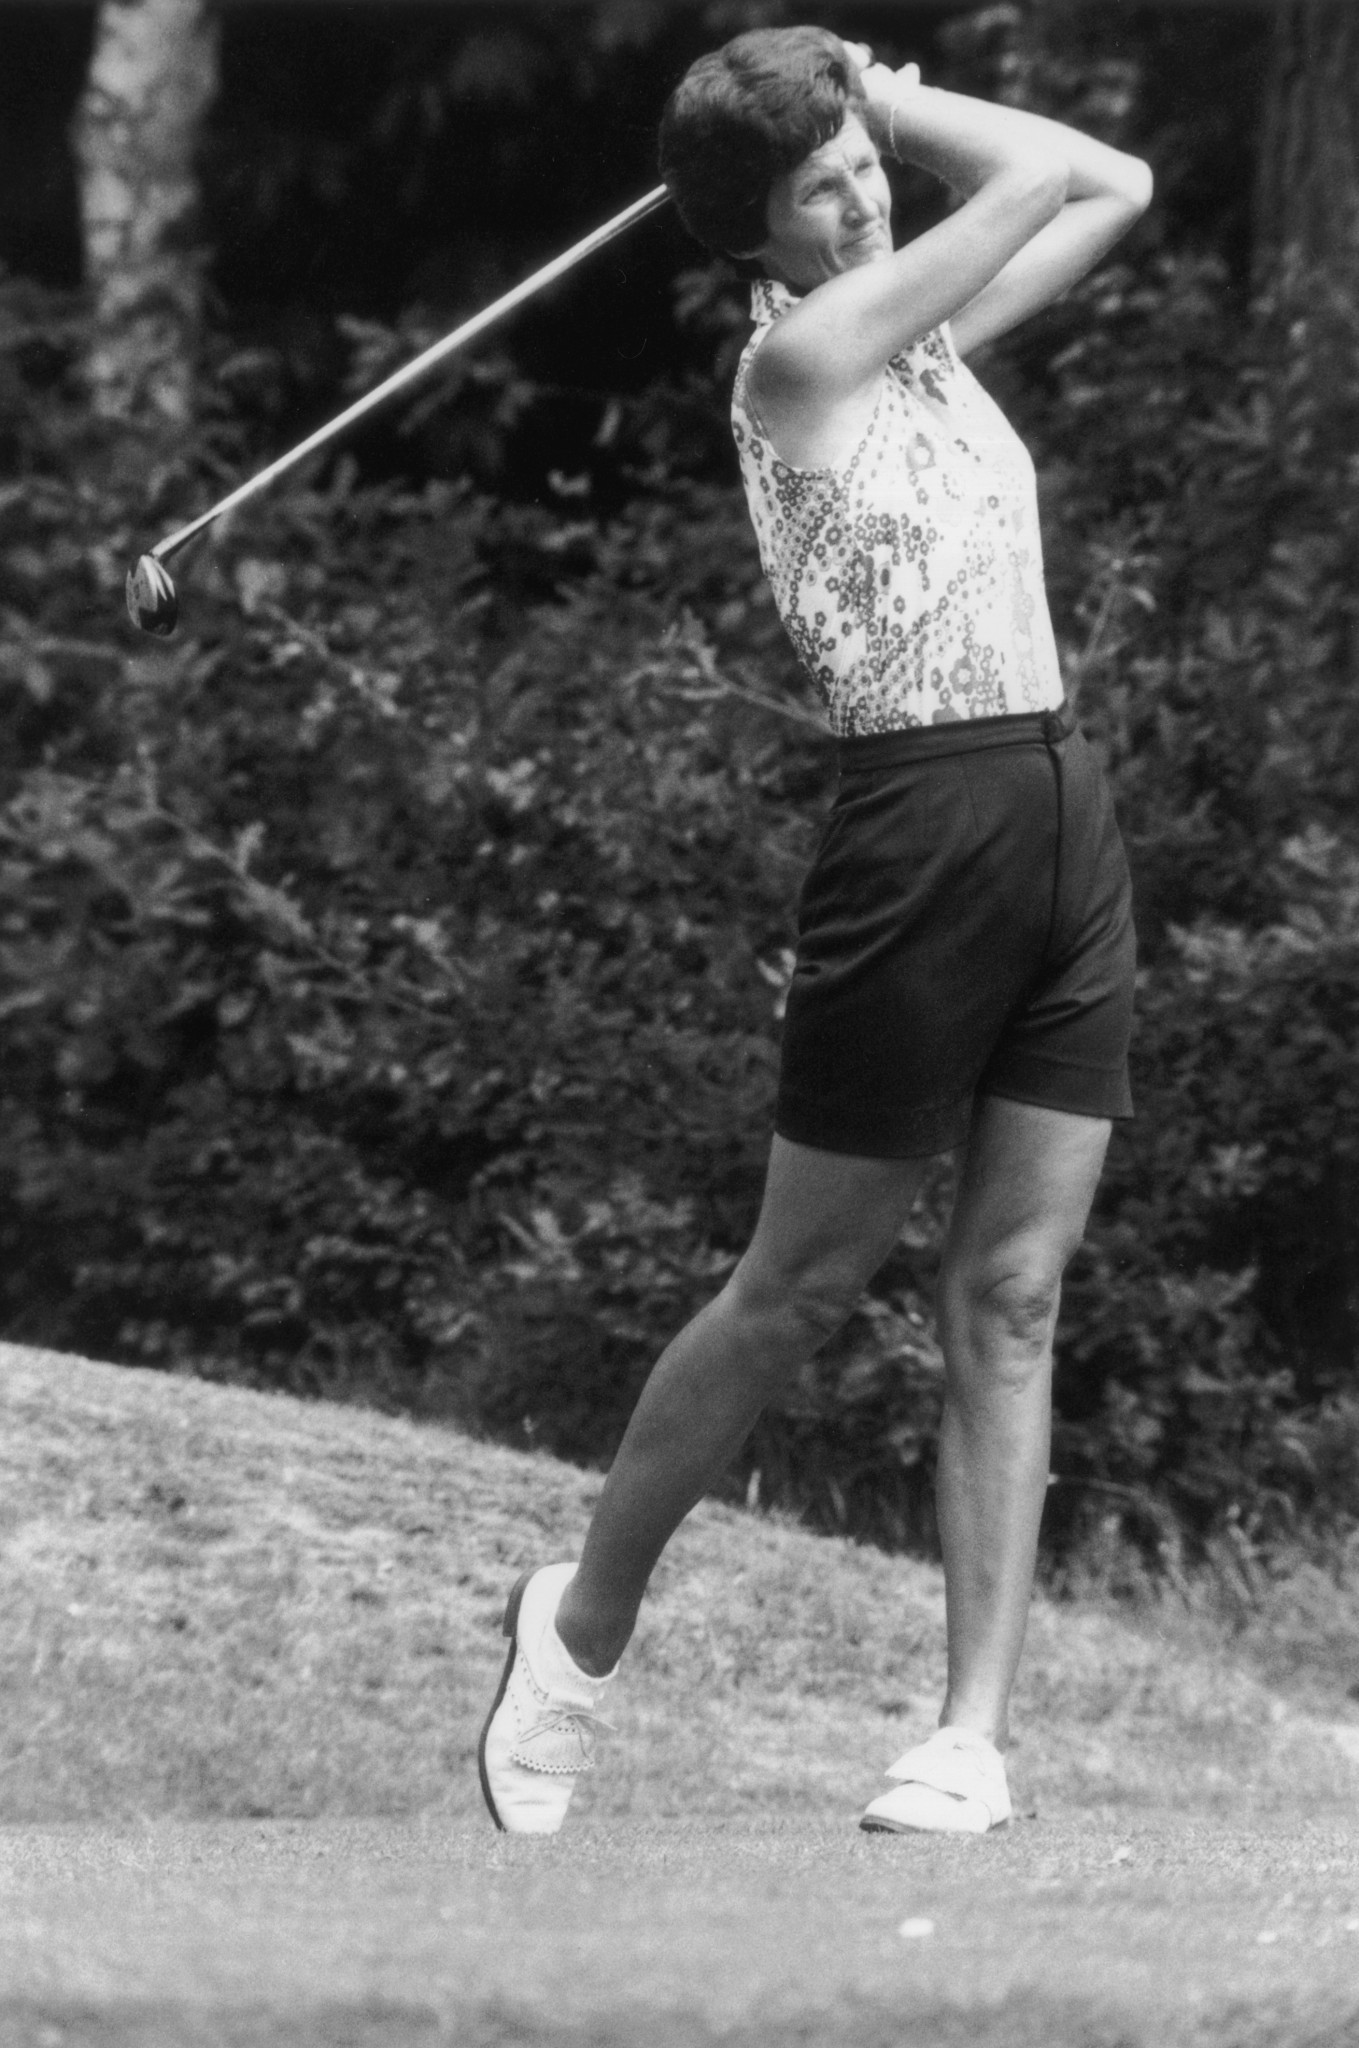 Kathy Whitworth won 88 LPGA tournaments during her career ©Getty Images